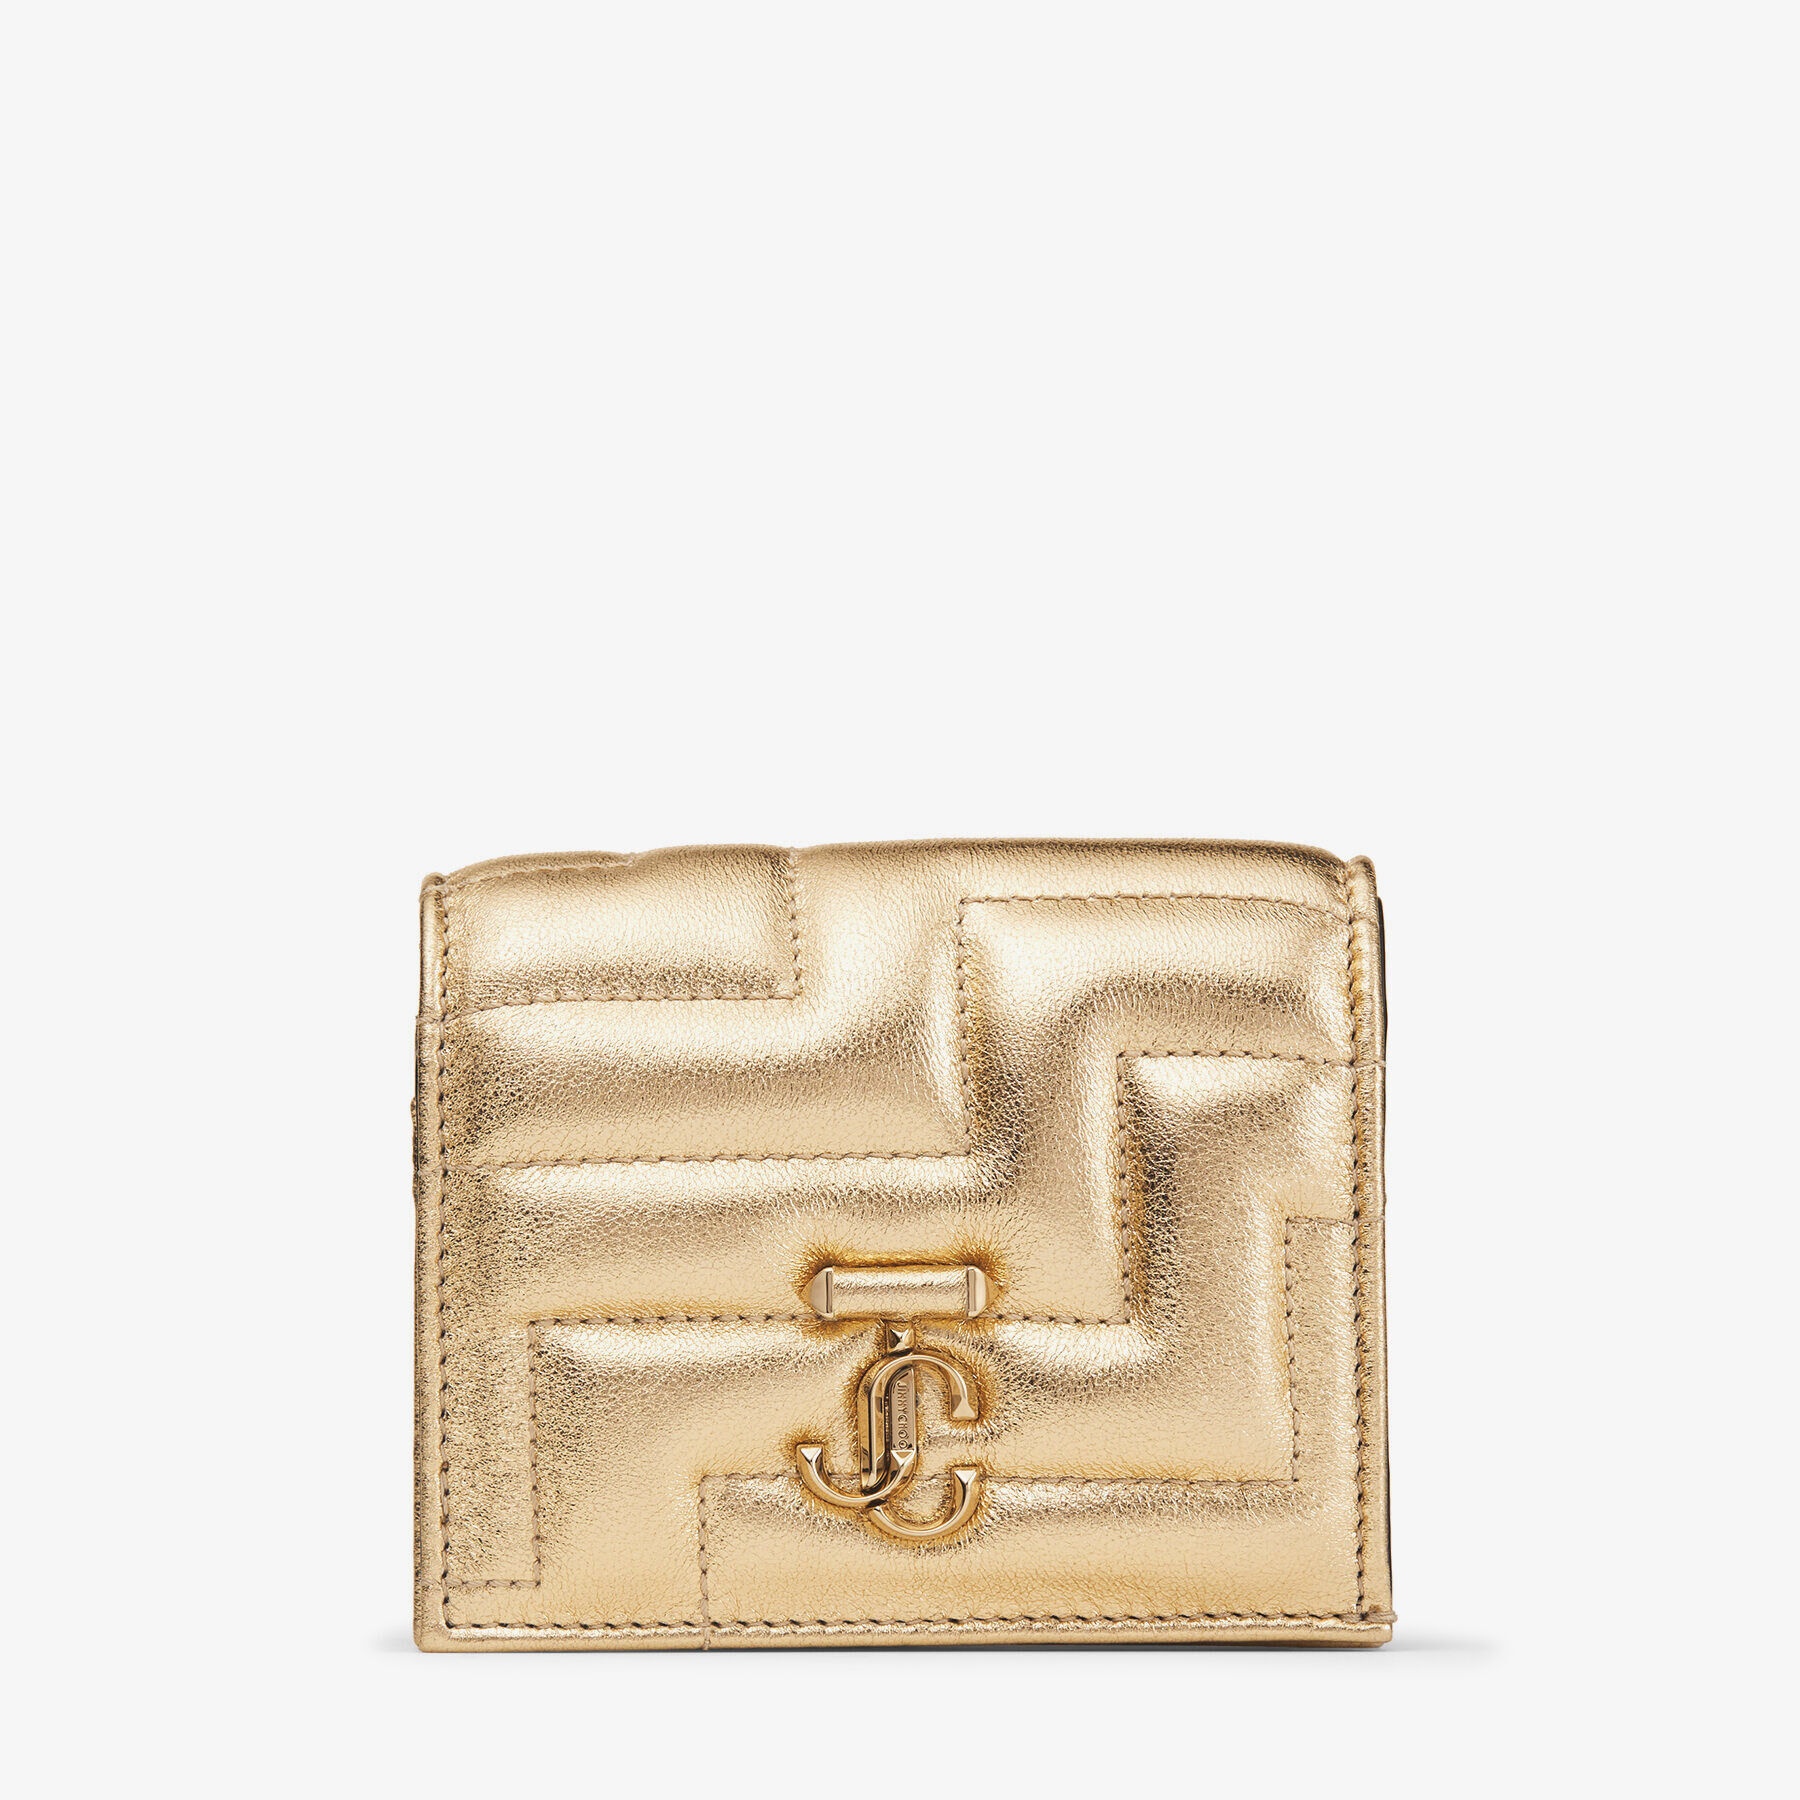 Hanne
Gold Quilted Metallic Nappa Leather Wallet with Light Gold JC Emblem - 1